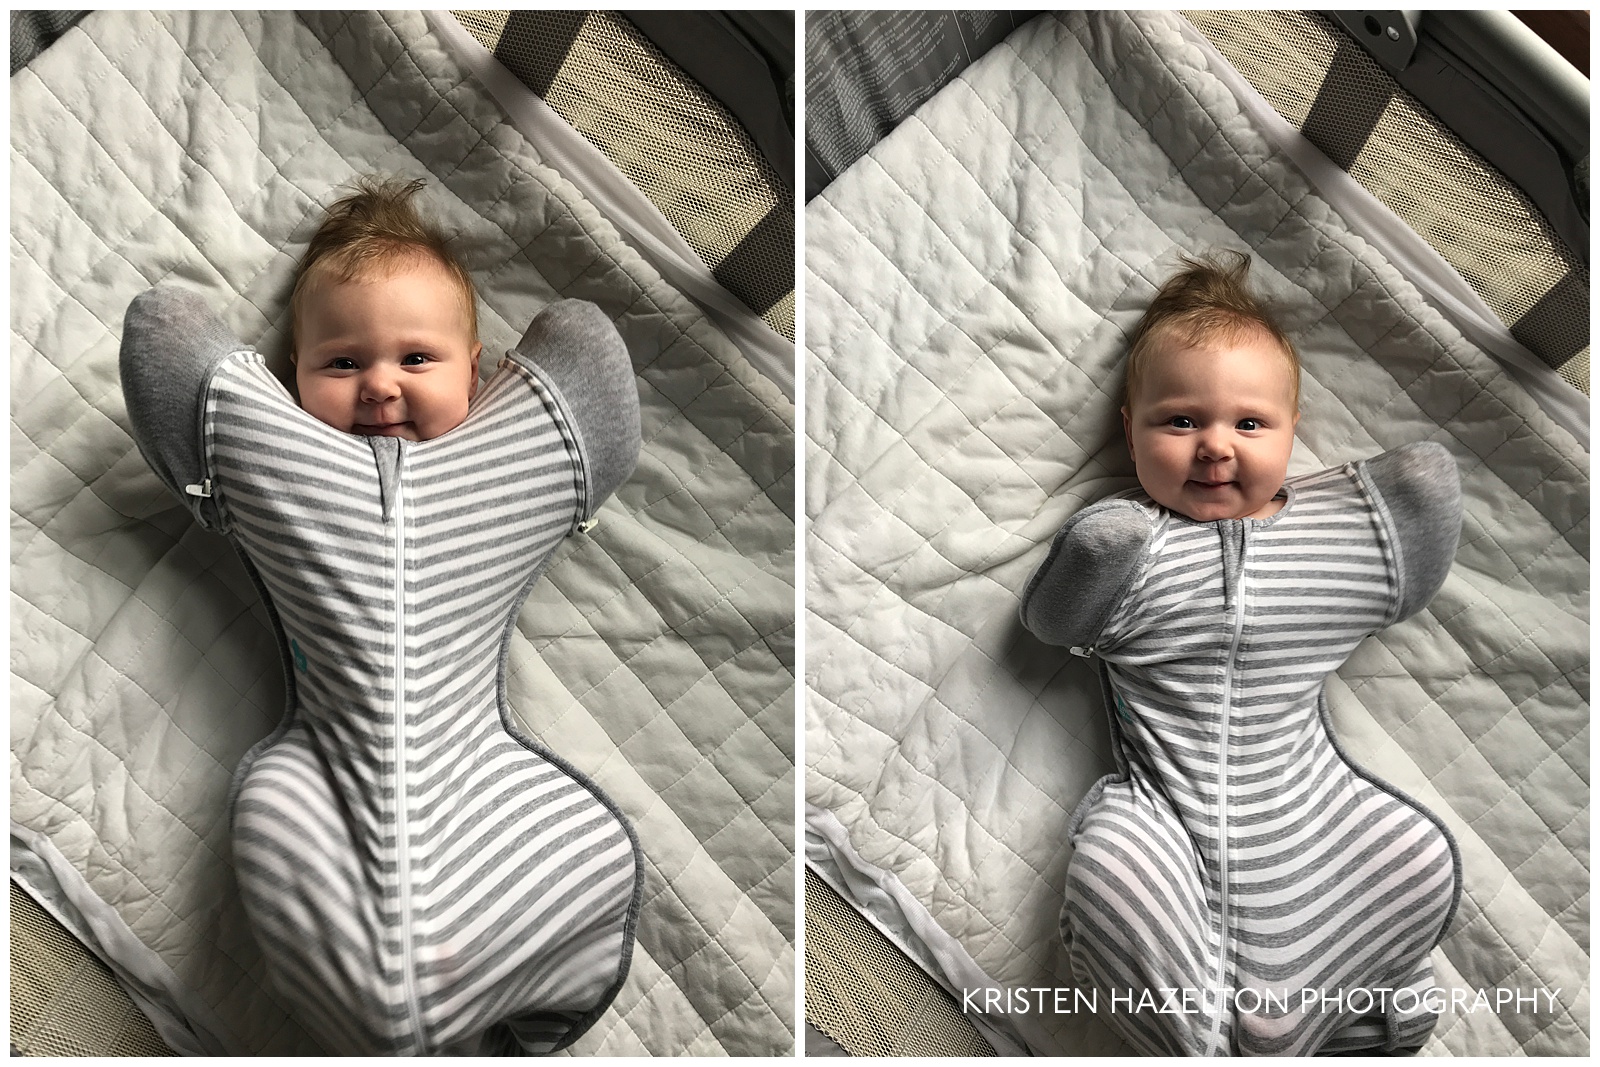 Happy, rested baby in a zip-up swaddle